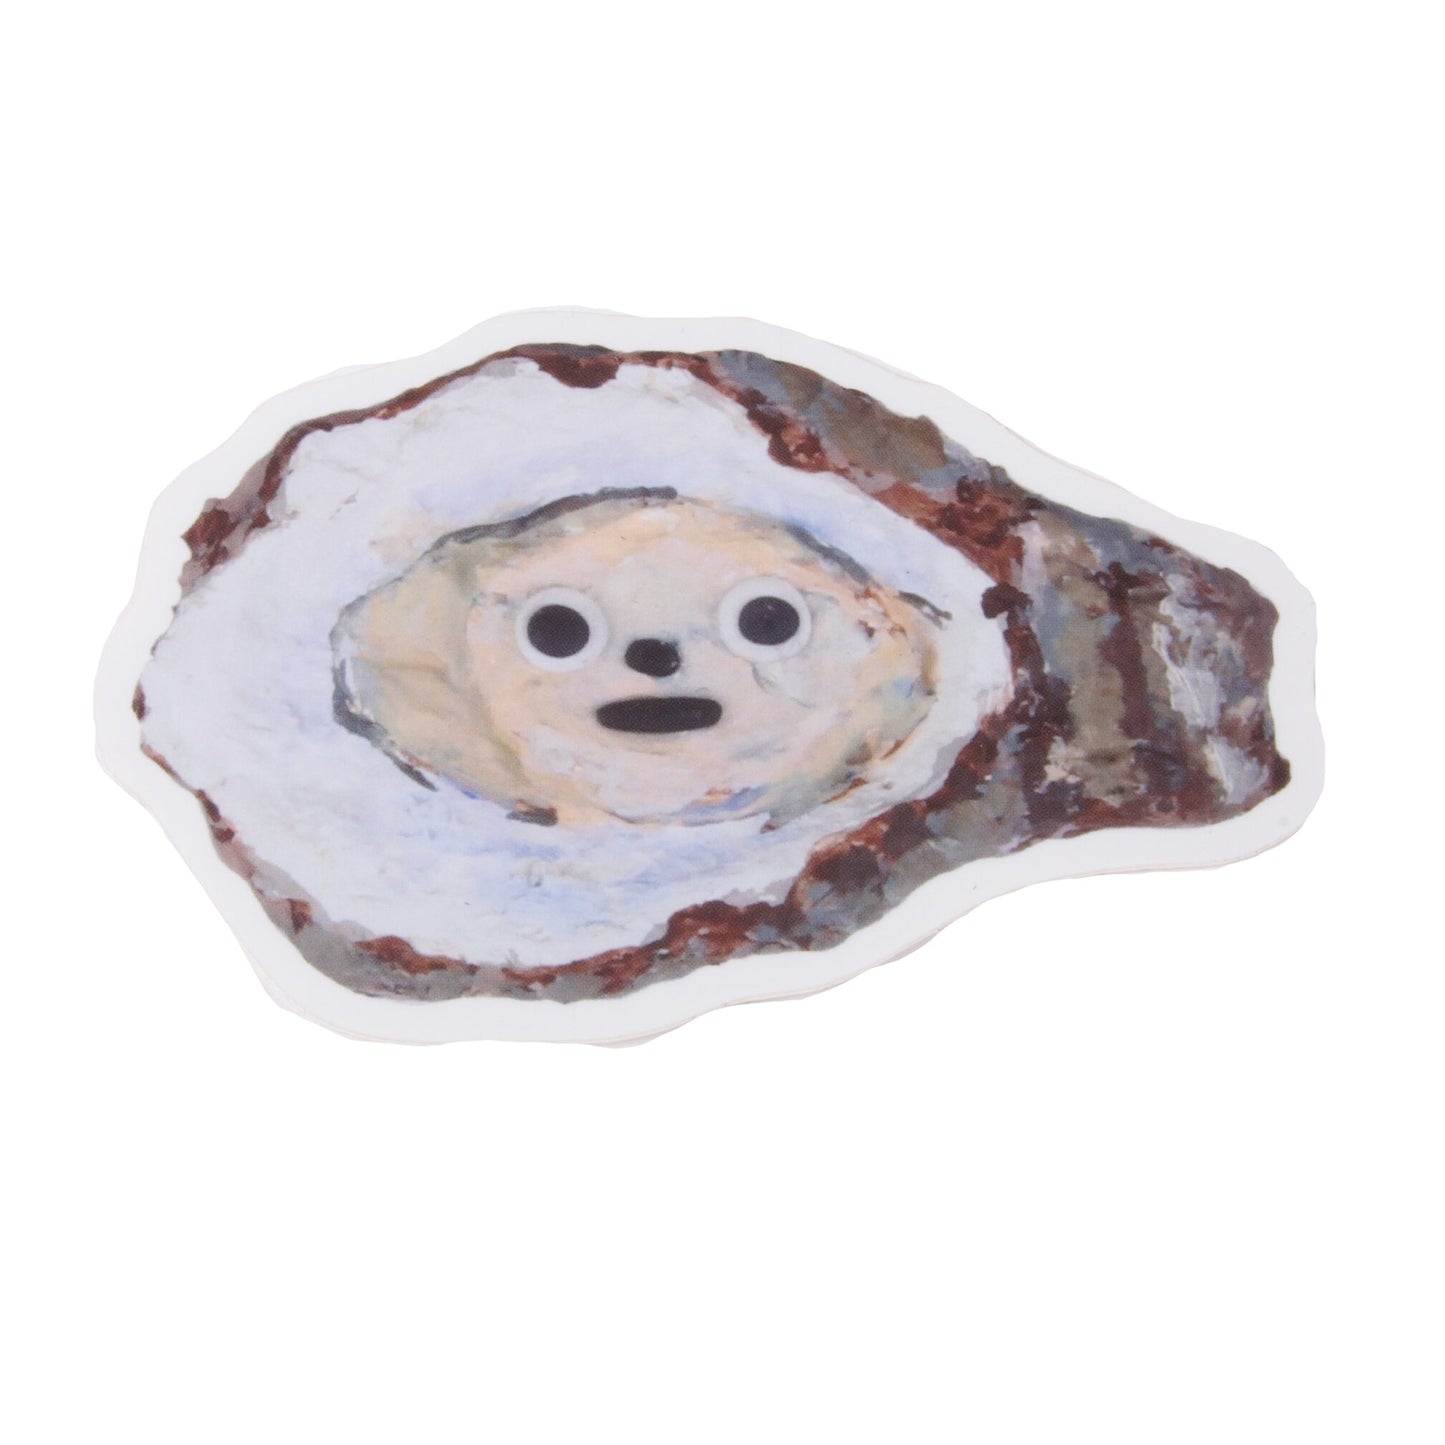 Oyster sticker with a face on it 